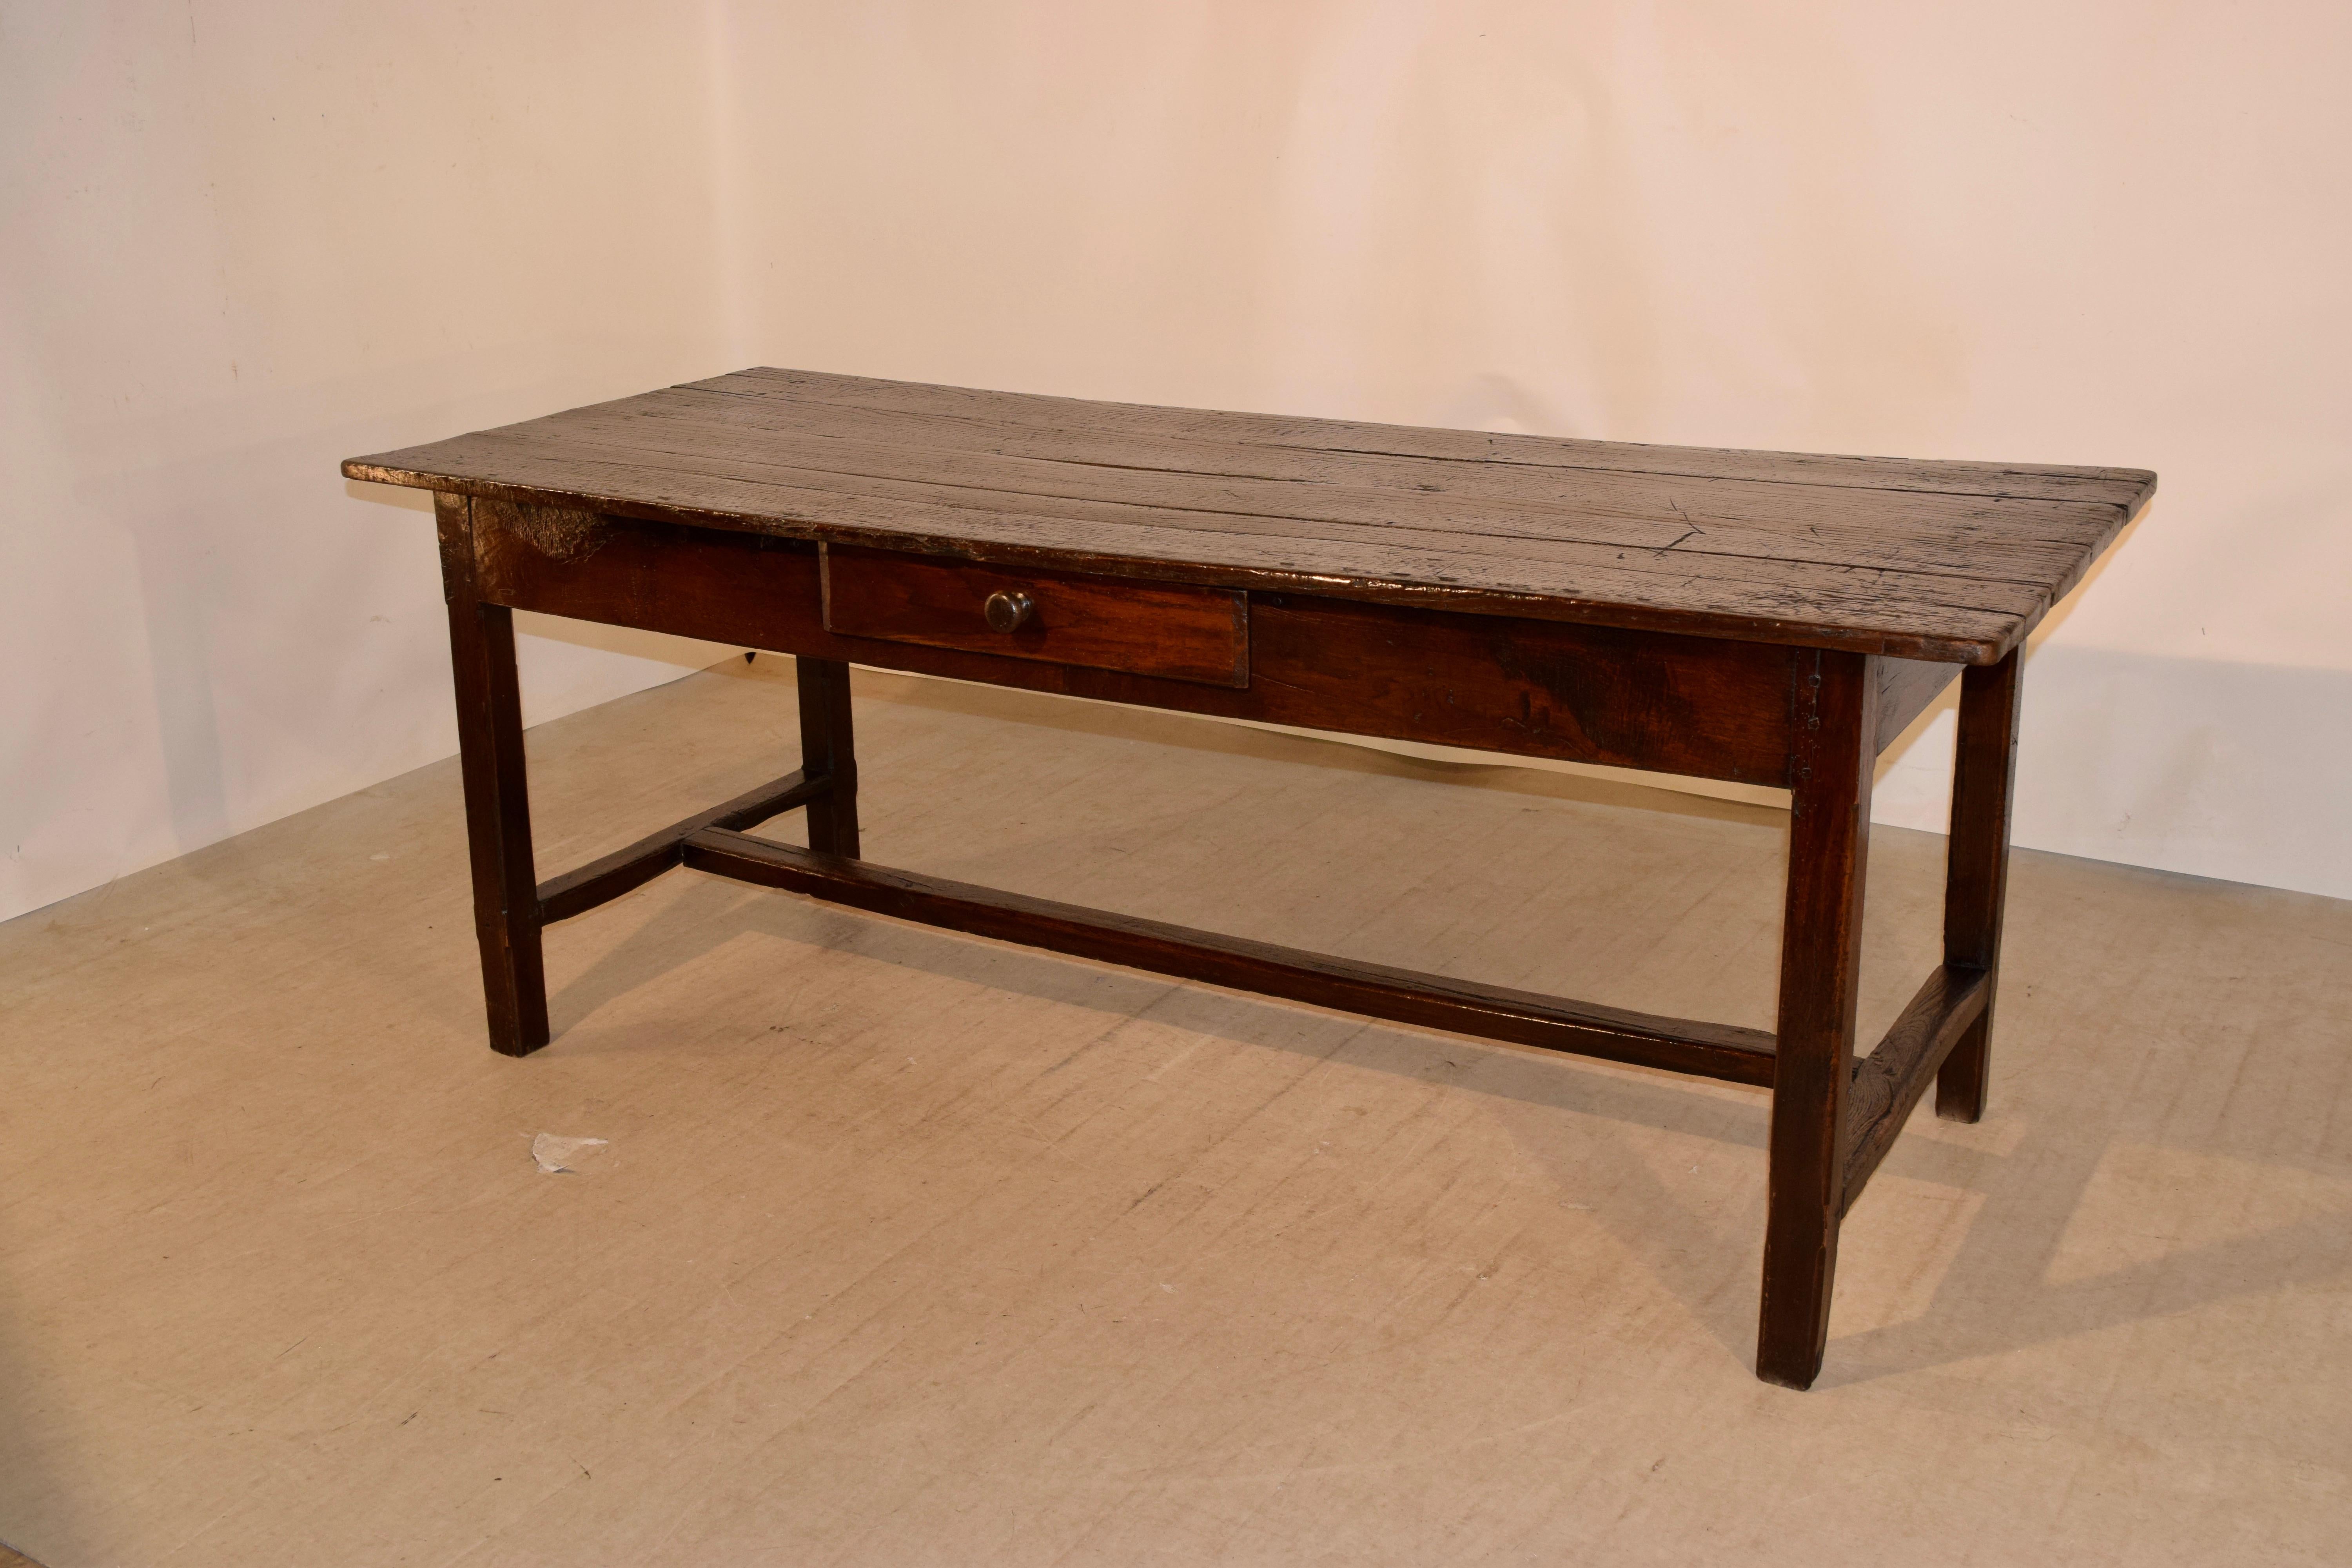 Early 19th century chestnut table from France with a plank top following down to a simple apron containing a single drawer and supported on hand turned legs joined by a cross stretcher. The apron measures 24.13 inches in height.